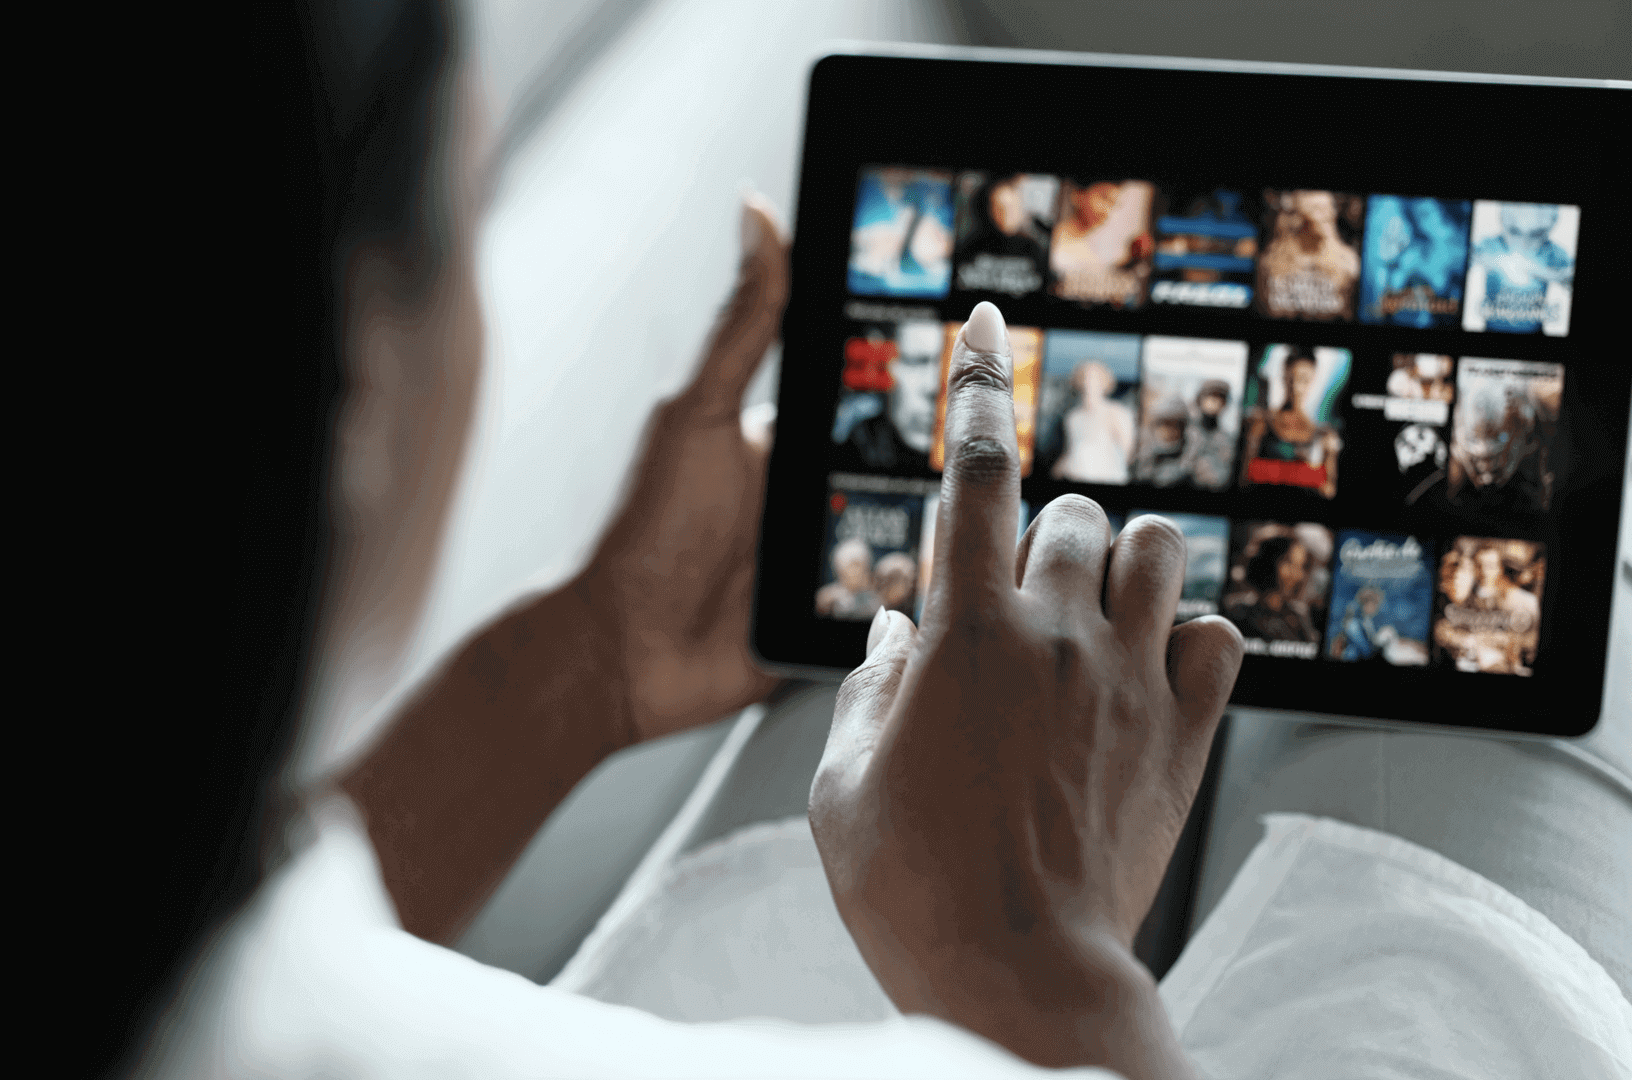 a woman presses her tablet that shows different streaming tv options